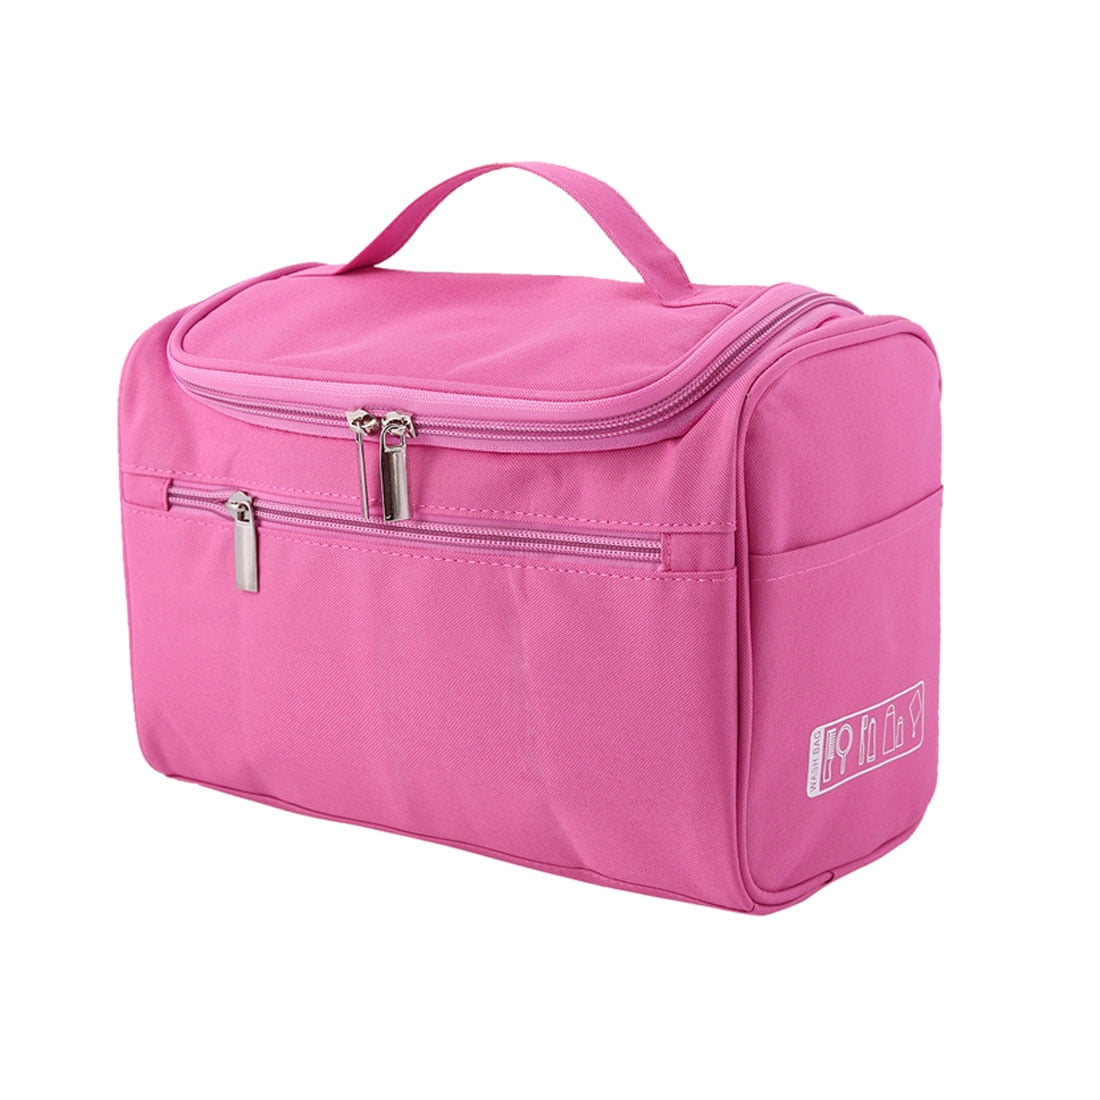 Hanging Toiletry Bag Portable Makeup Bag Toiletry Wash Organizer Pouch Pink | Walmart Canada